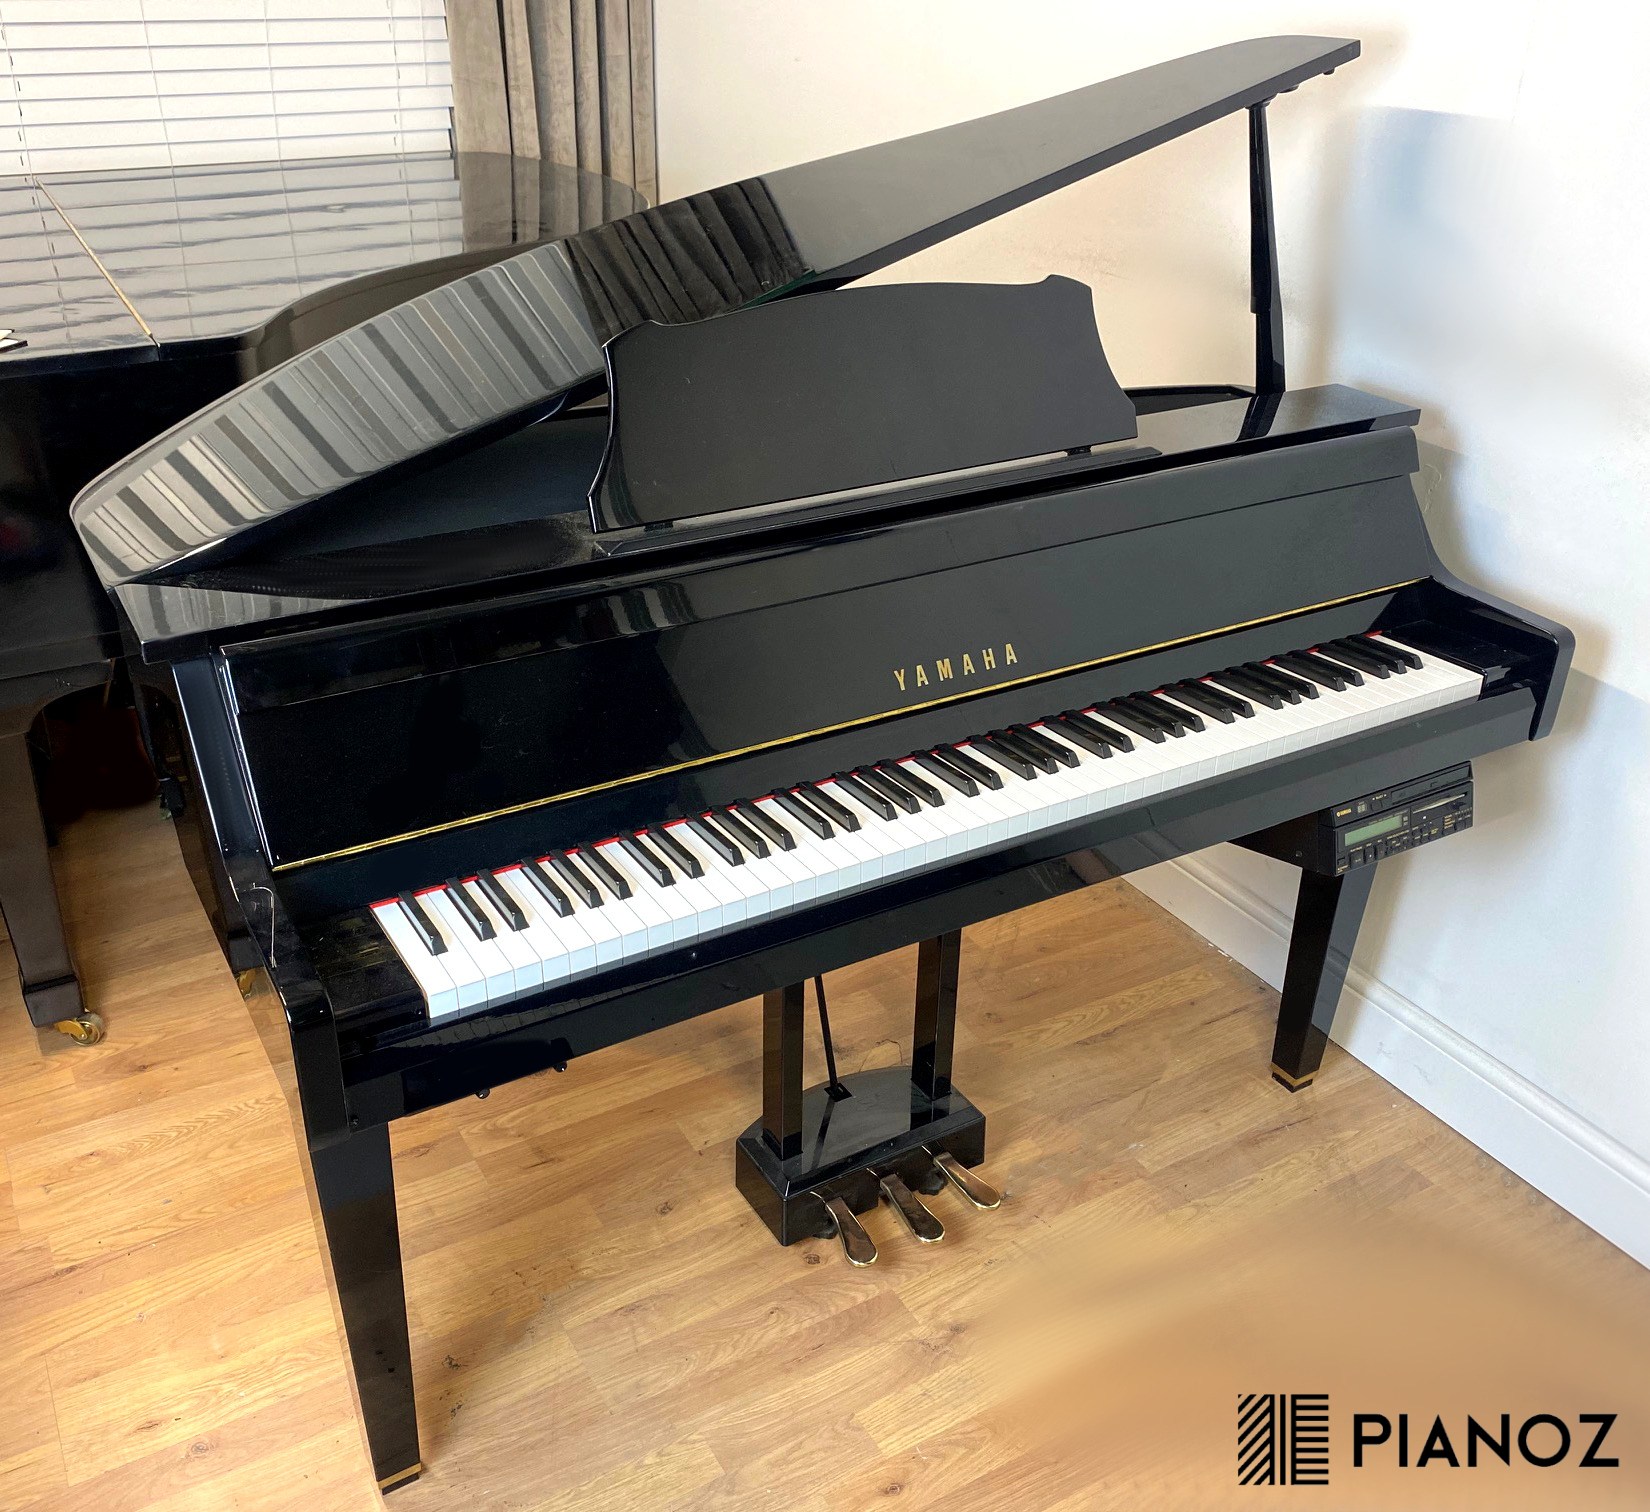 Yamaha DG2A Self Playing Digital Piano piano for sale in UK